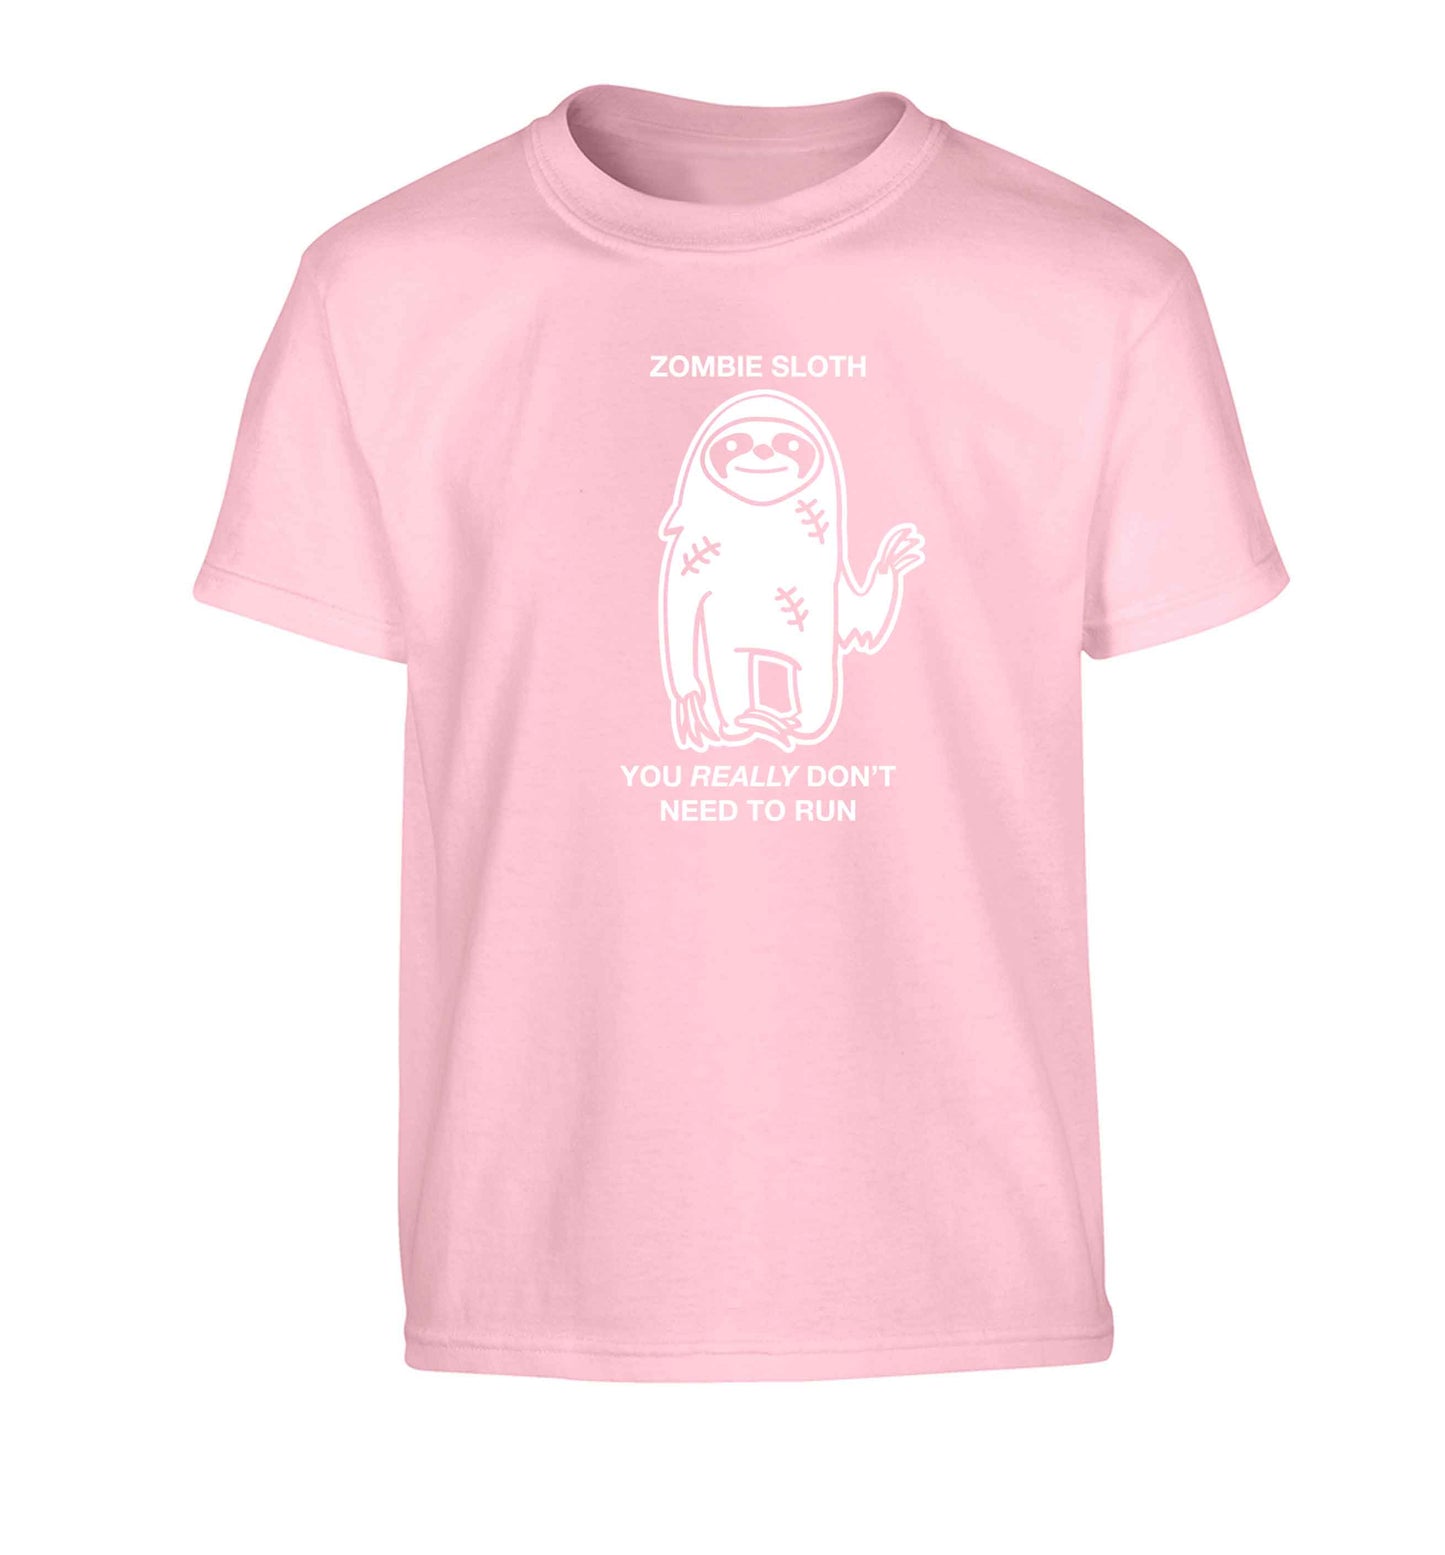 Zombie sloth you really don't need to run Children's light pink Tshirt 12-13 Years